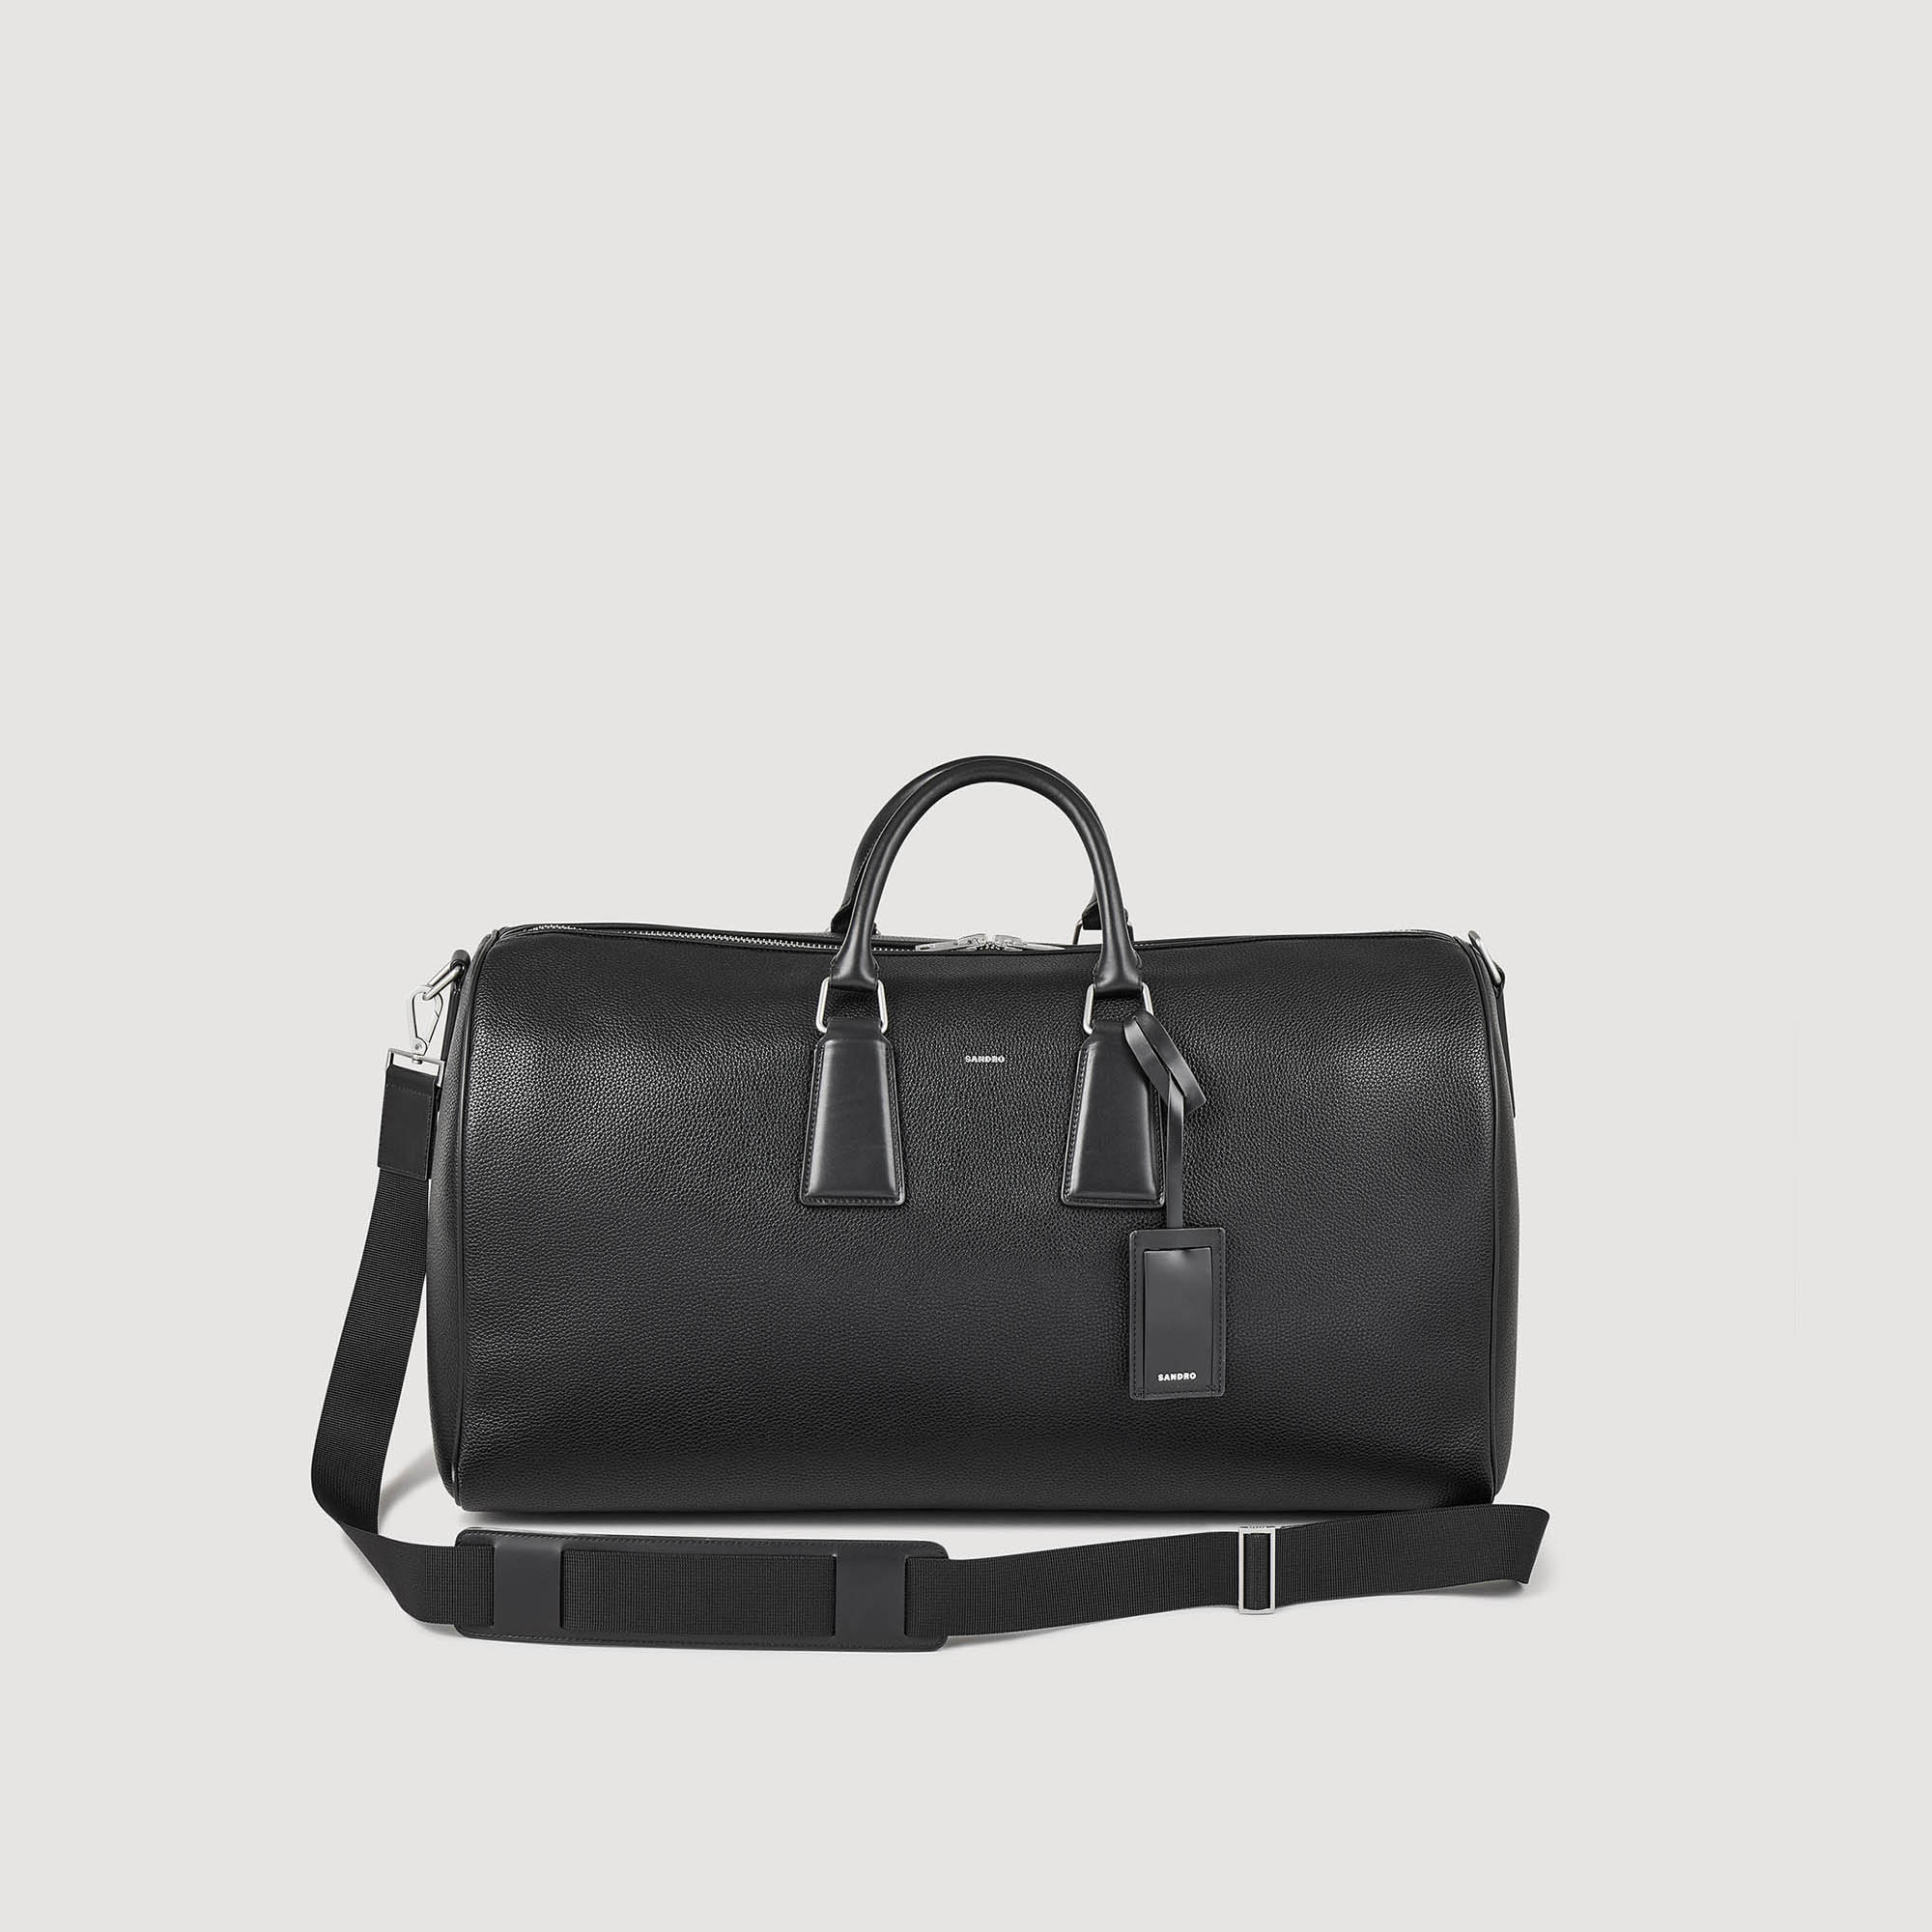 Sandro polyester Lining: Weekend bag in grained coated canvas with a zip fastening, adjustable shoulder strap, and leather details